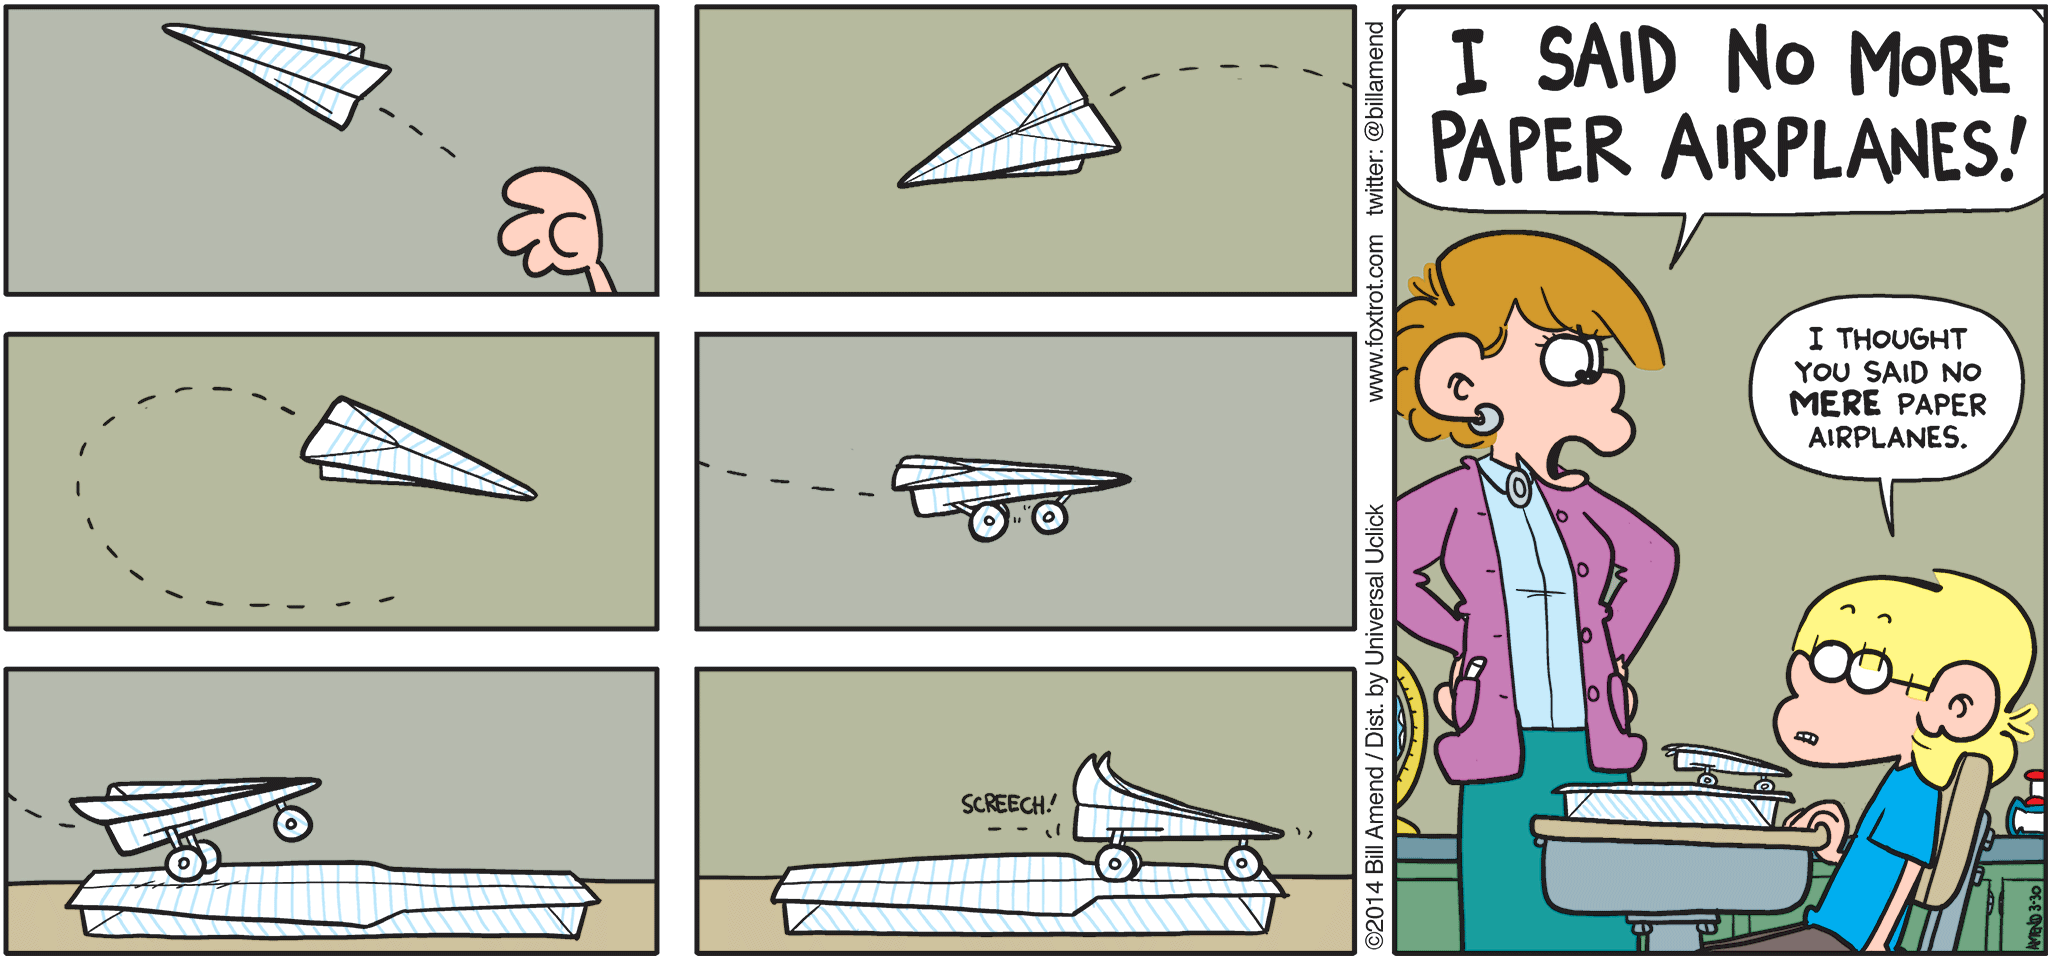 FoxTrot by Bill Amend - "Loop-de-loopholes" published March 30, 2014 - Teacher: I SAID NO MORE PAPER AIRPLANES! Jason: I thought you said no MERE paper airplanes.